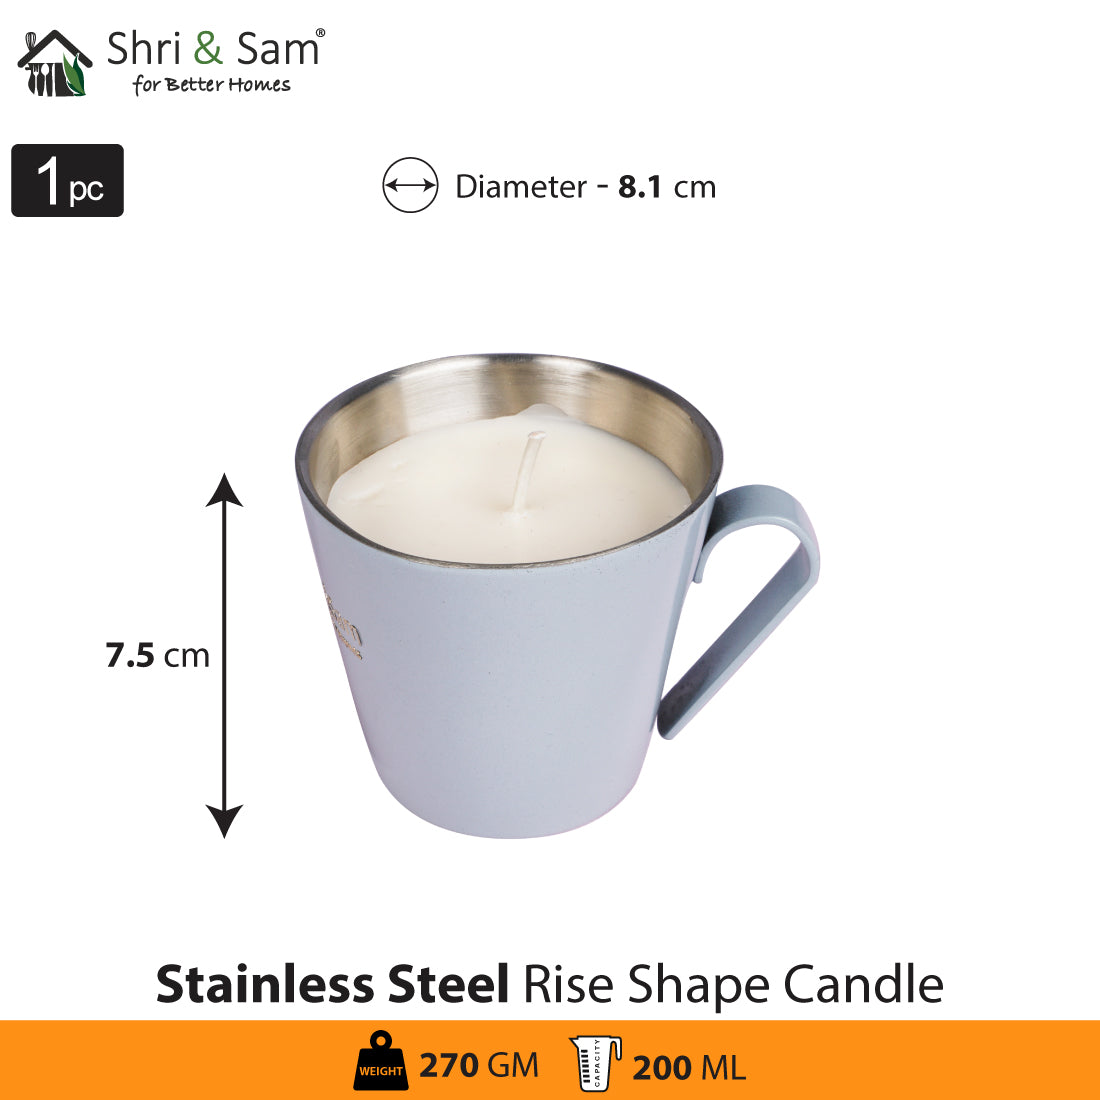 Stainless Steel Single Wick Rise shape Cup Candle